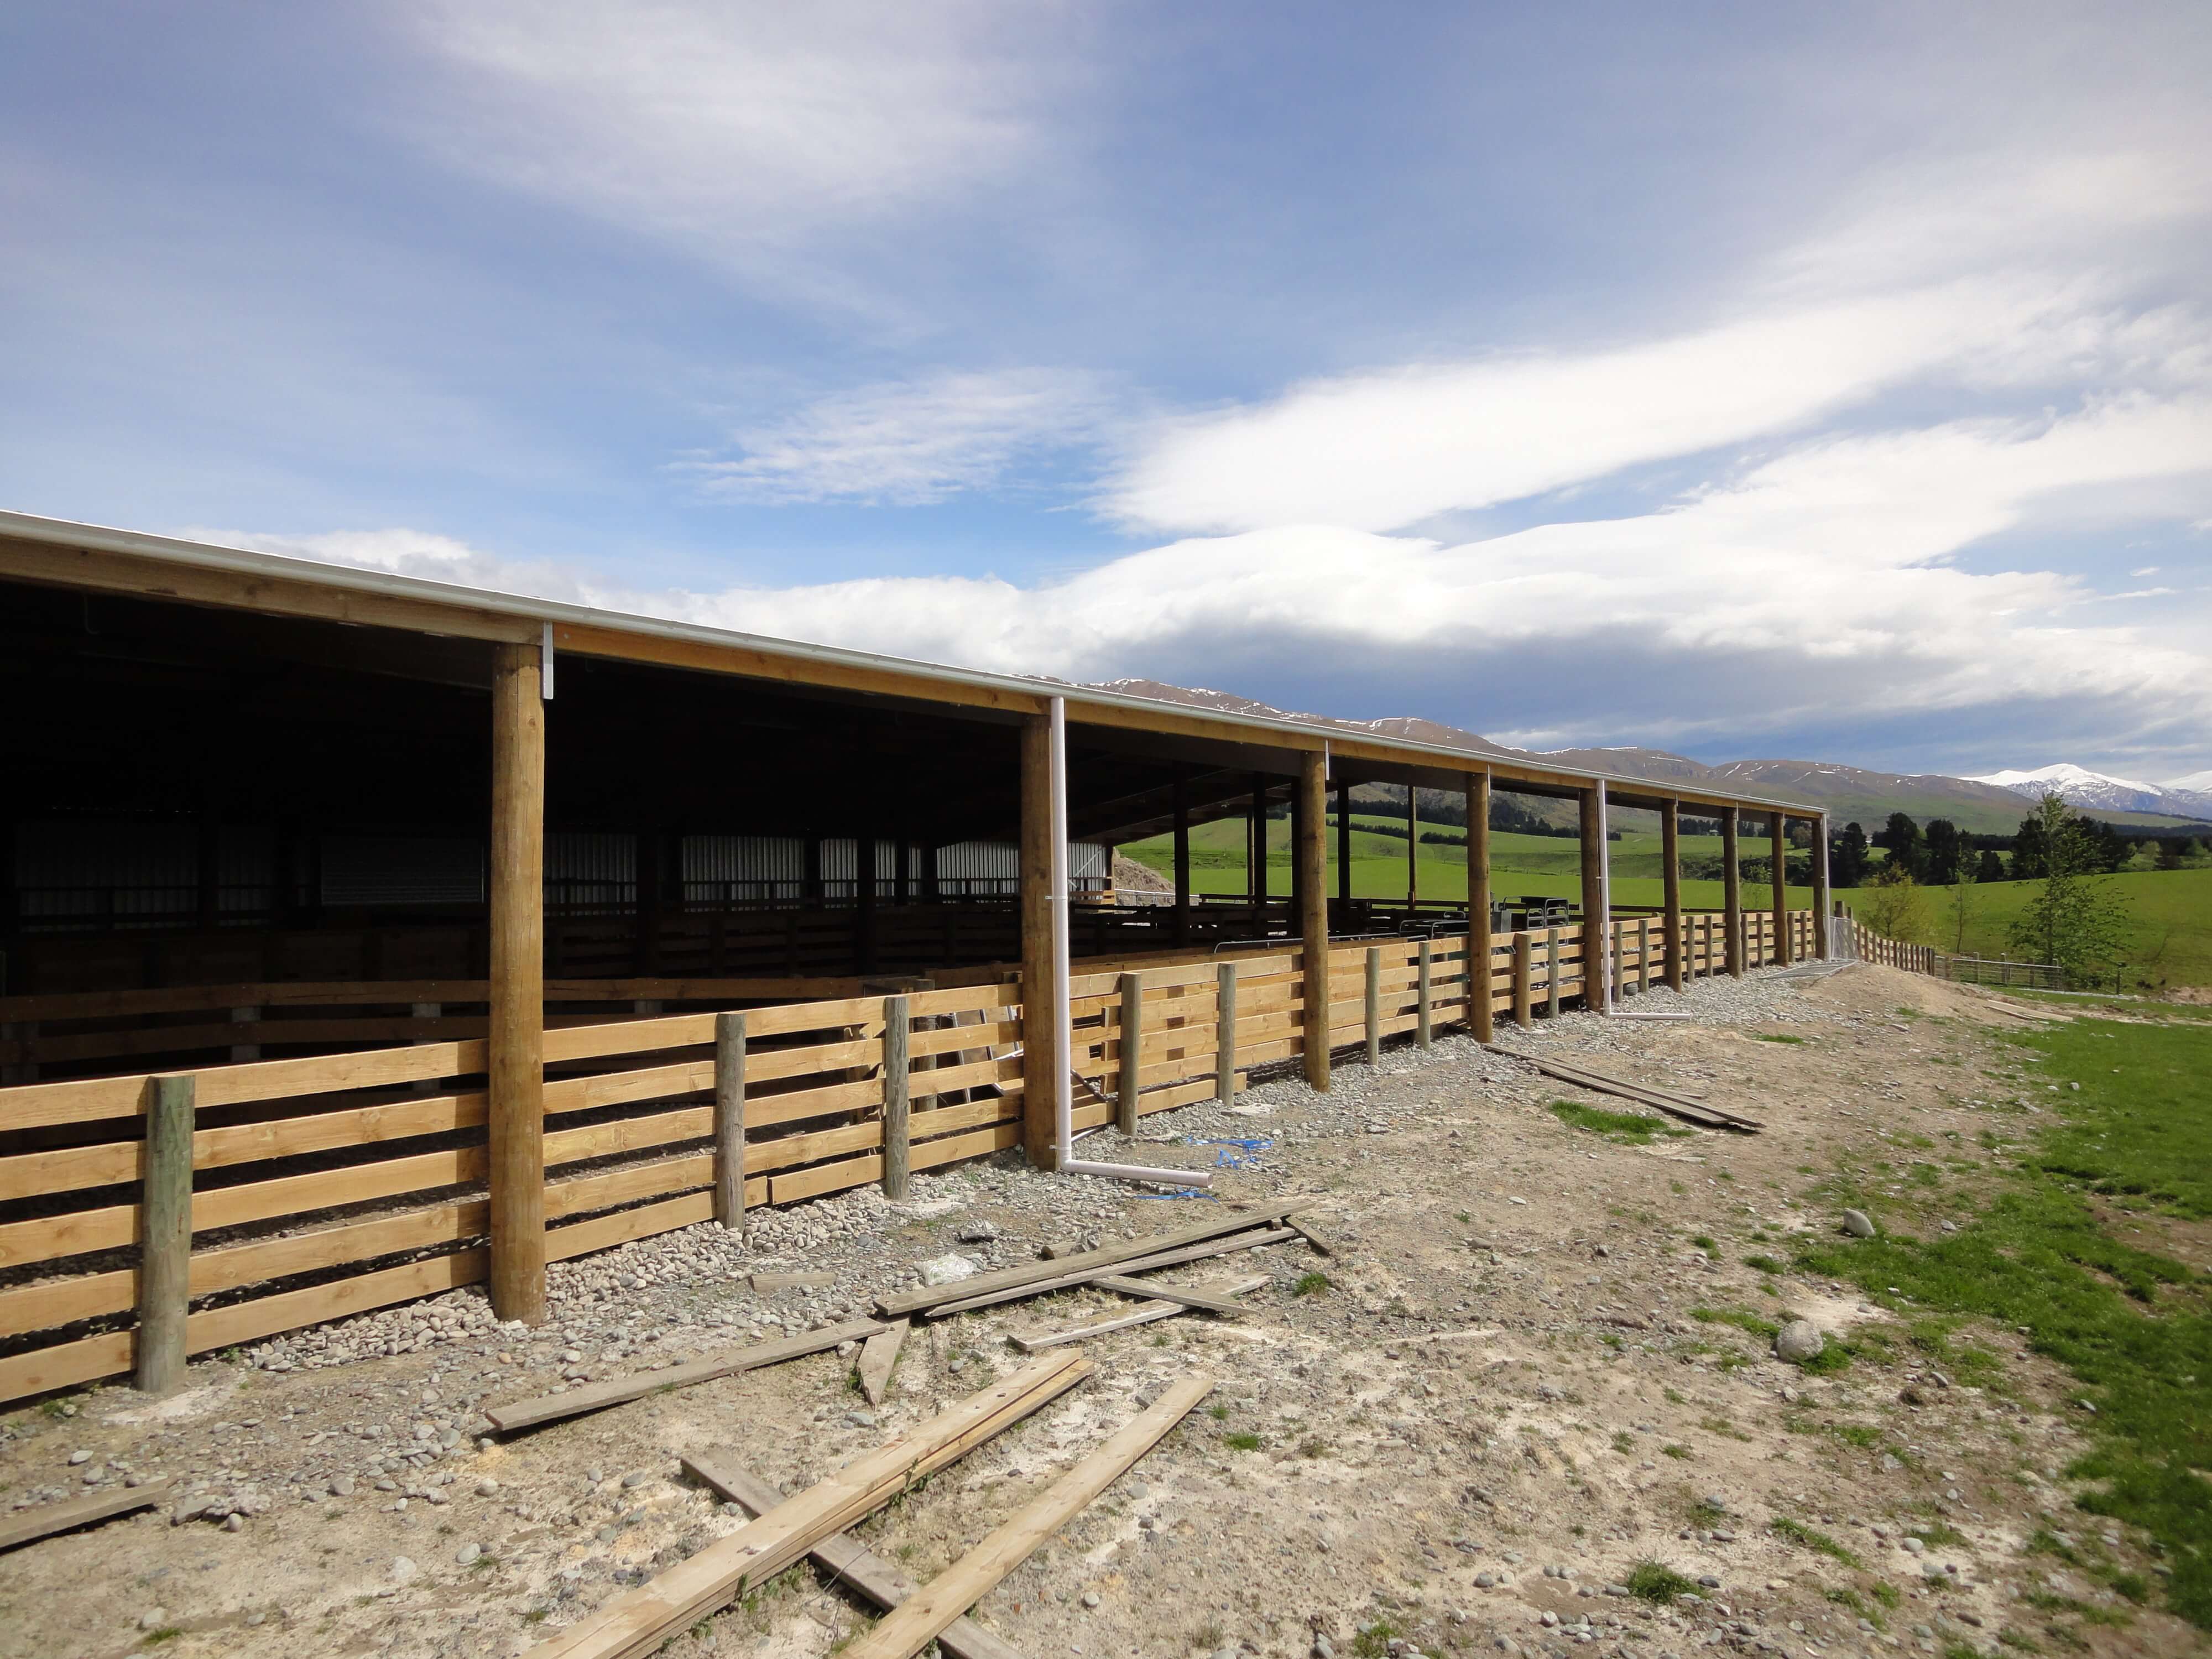 Animal health and safety is important with an Alpine animal shelter design